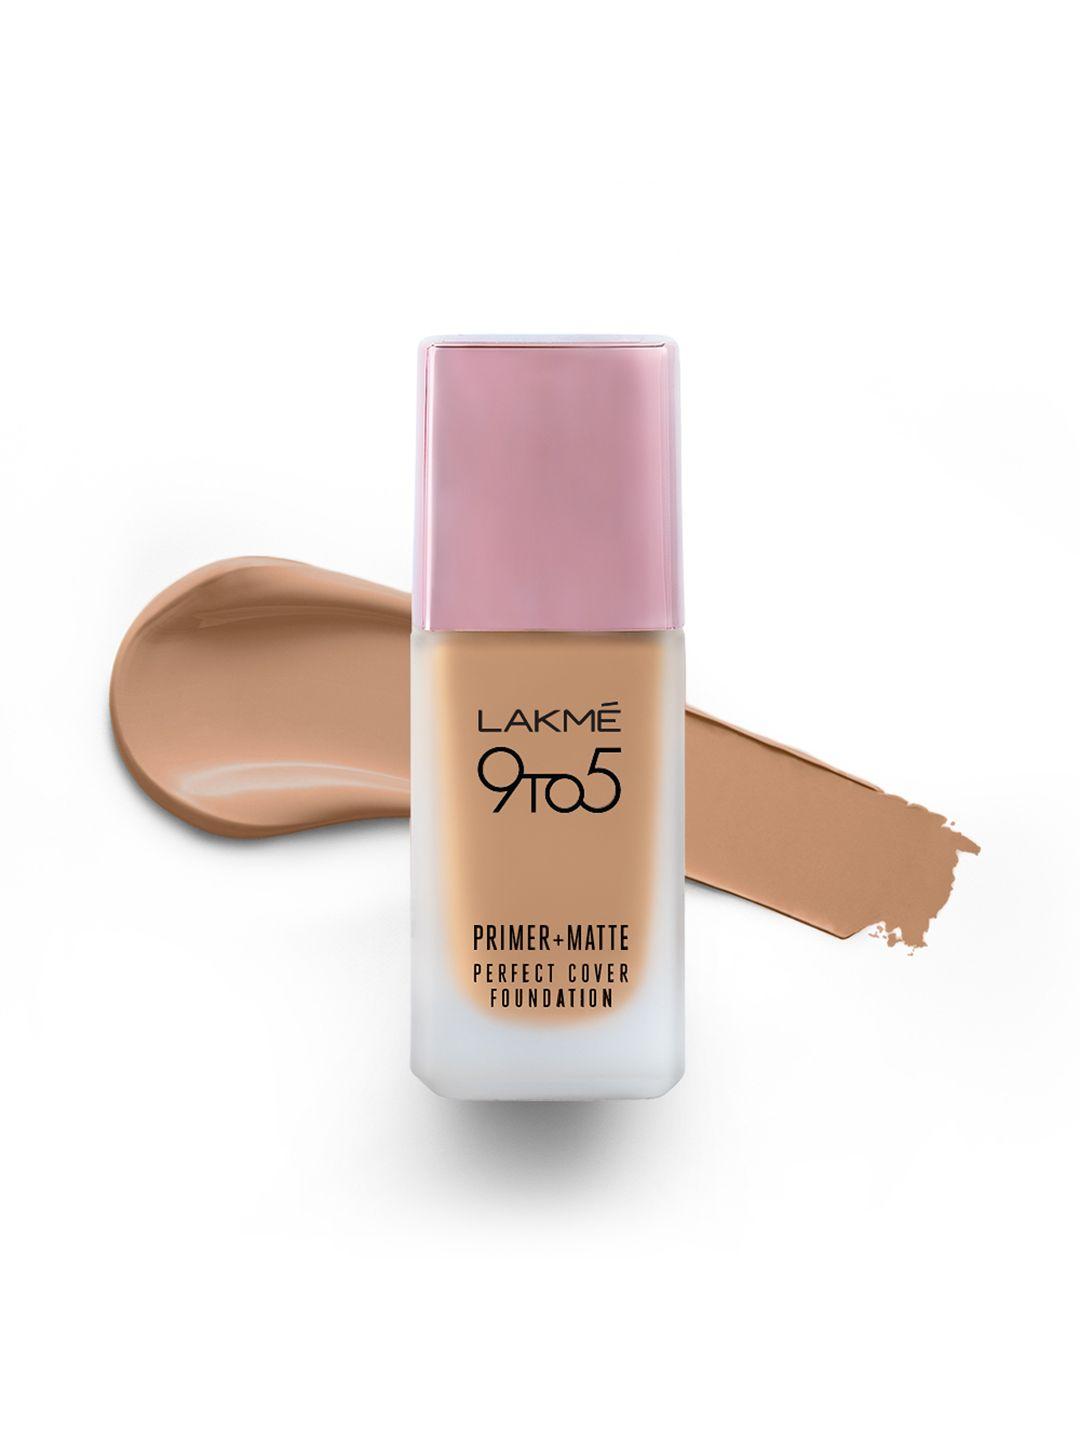 lakme 9to5 primer + matte perfect cover spf20 foundation 25 ml - neutral light n150